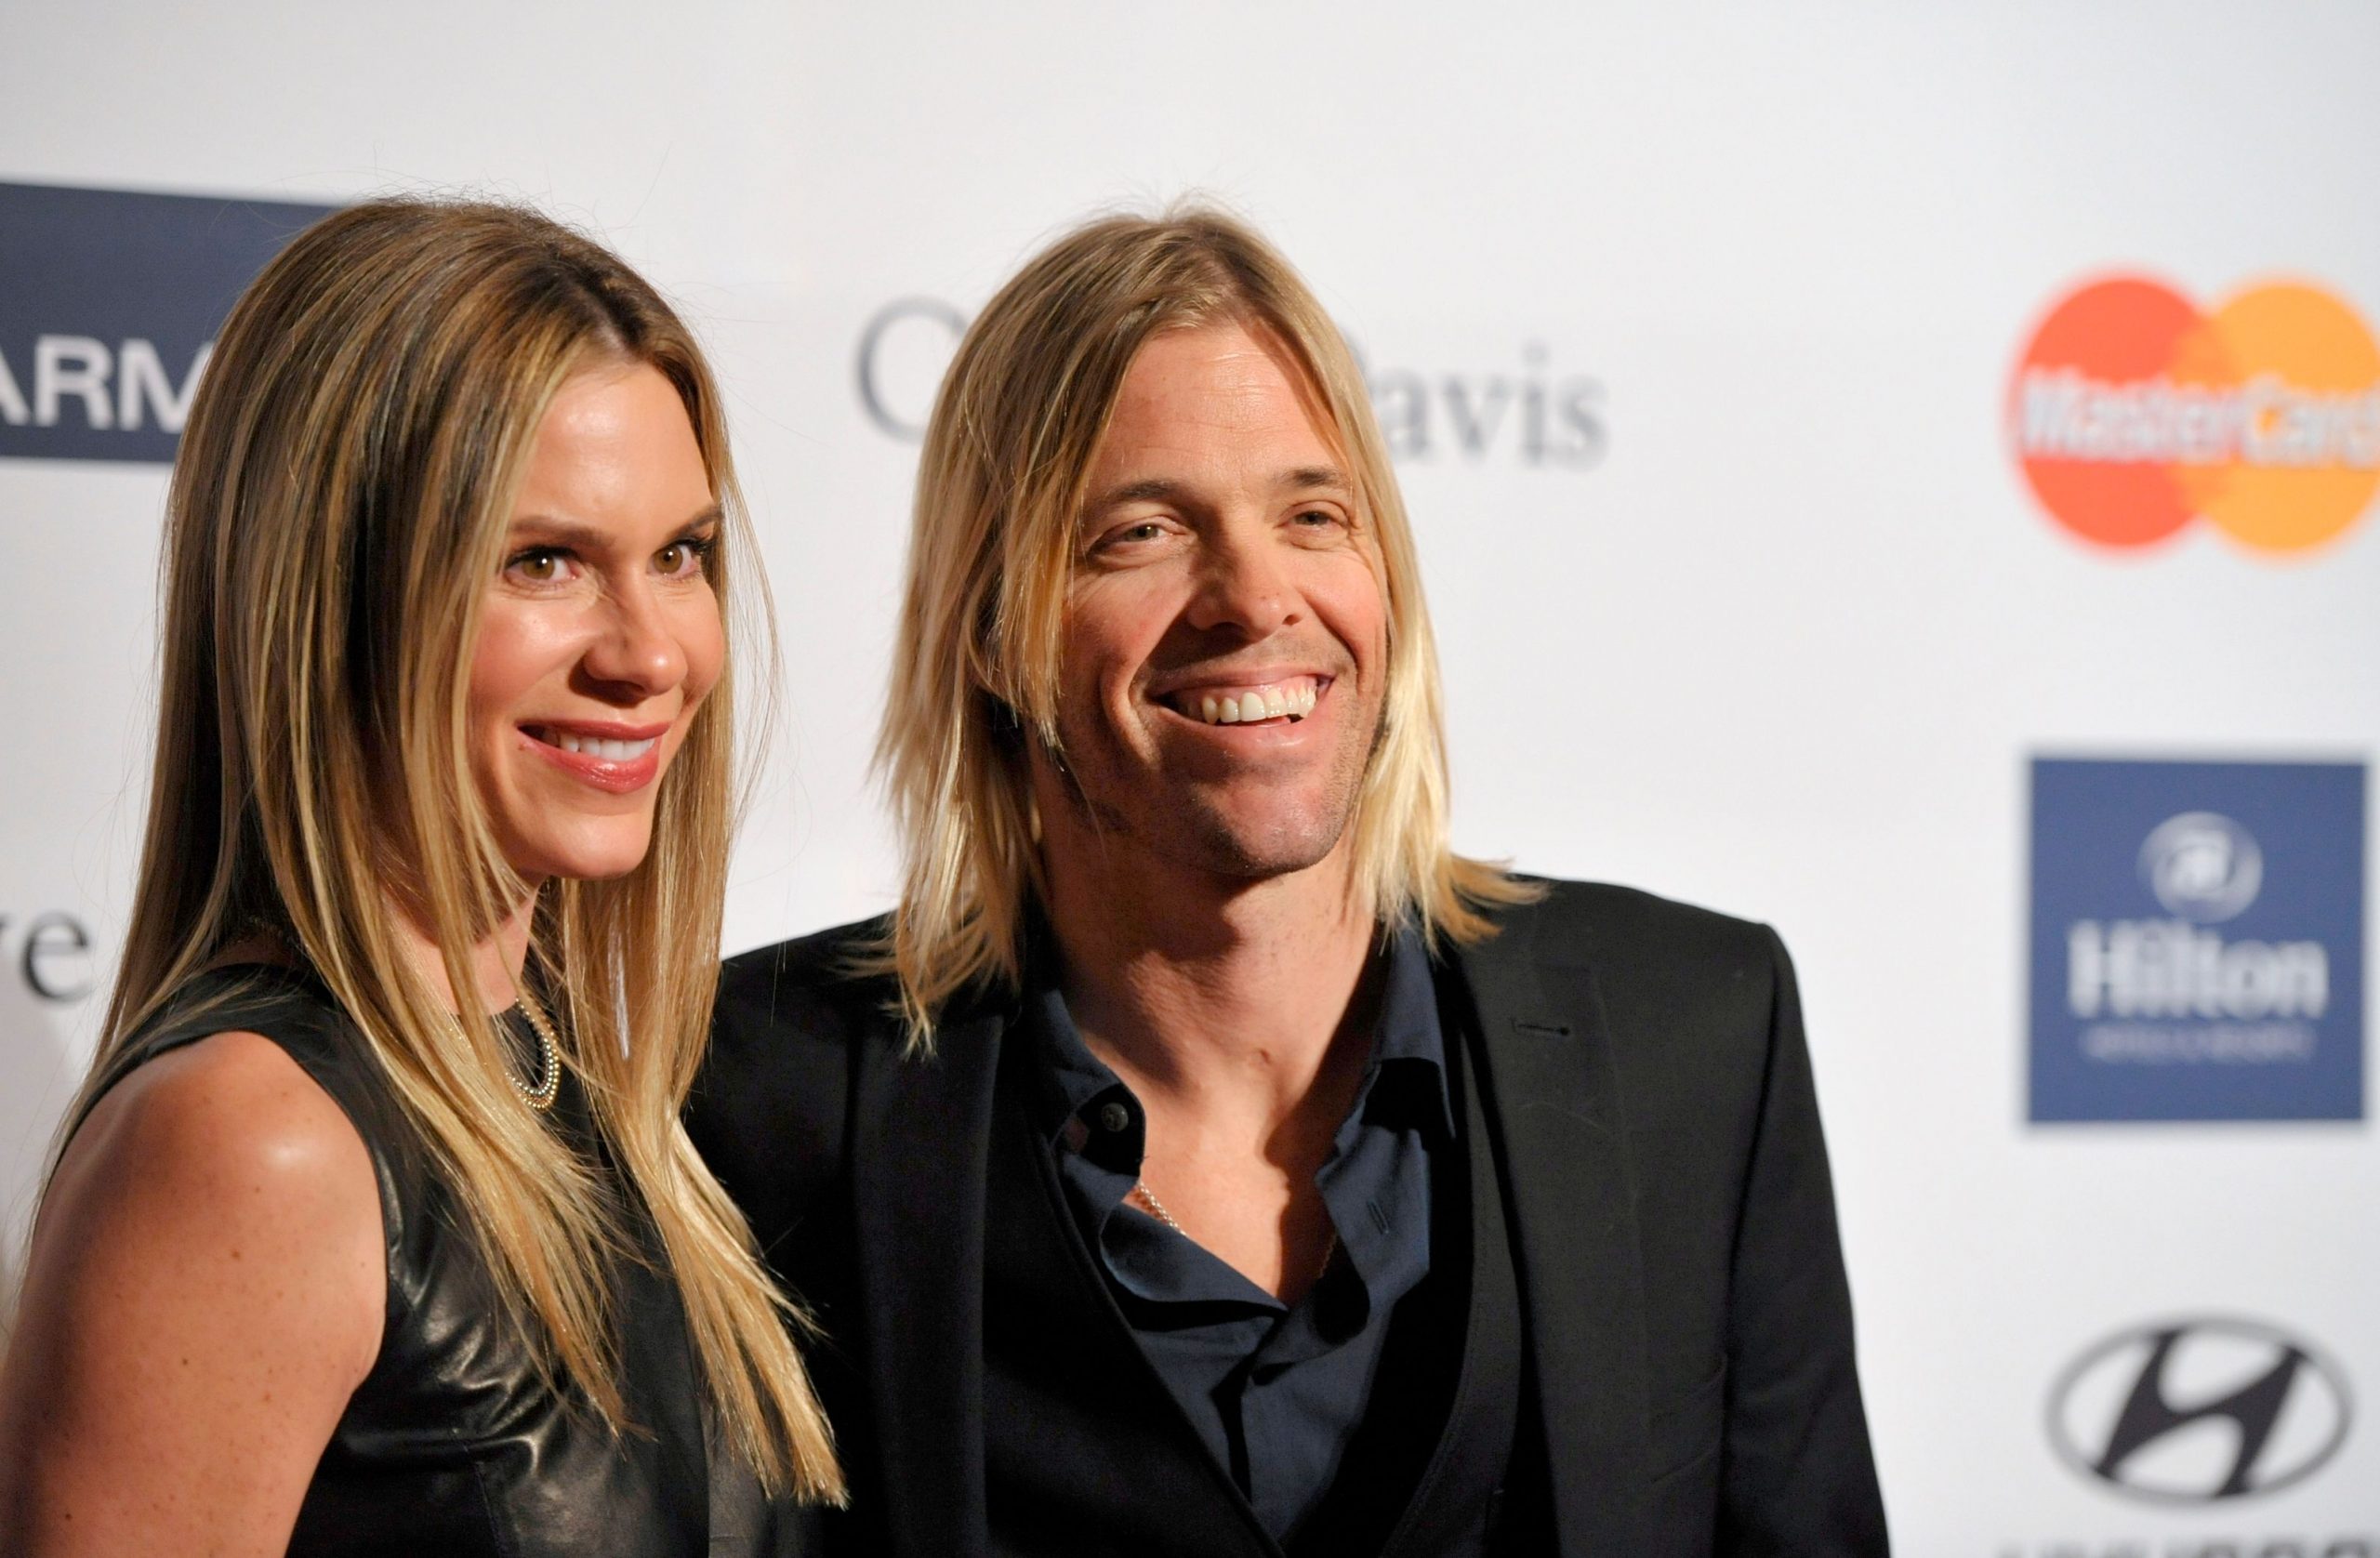 Taylor Hawkins cause of death, net worth, wife, children and other details